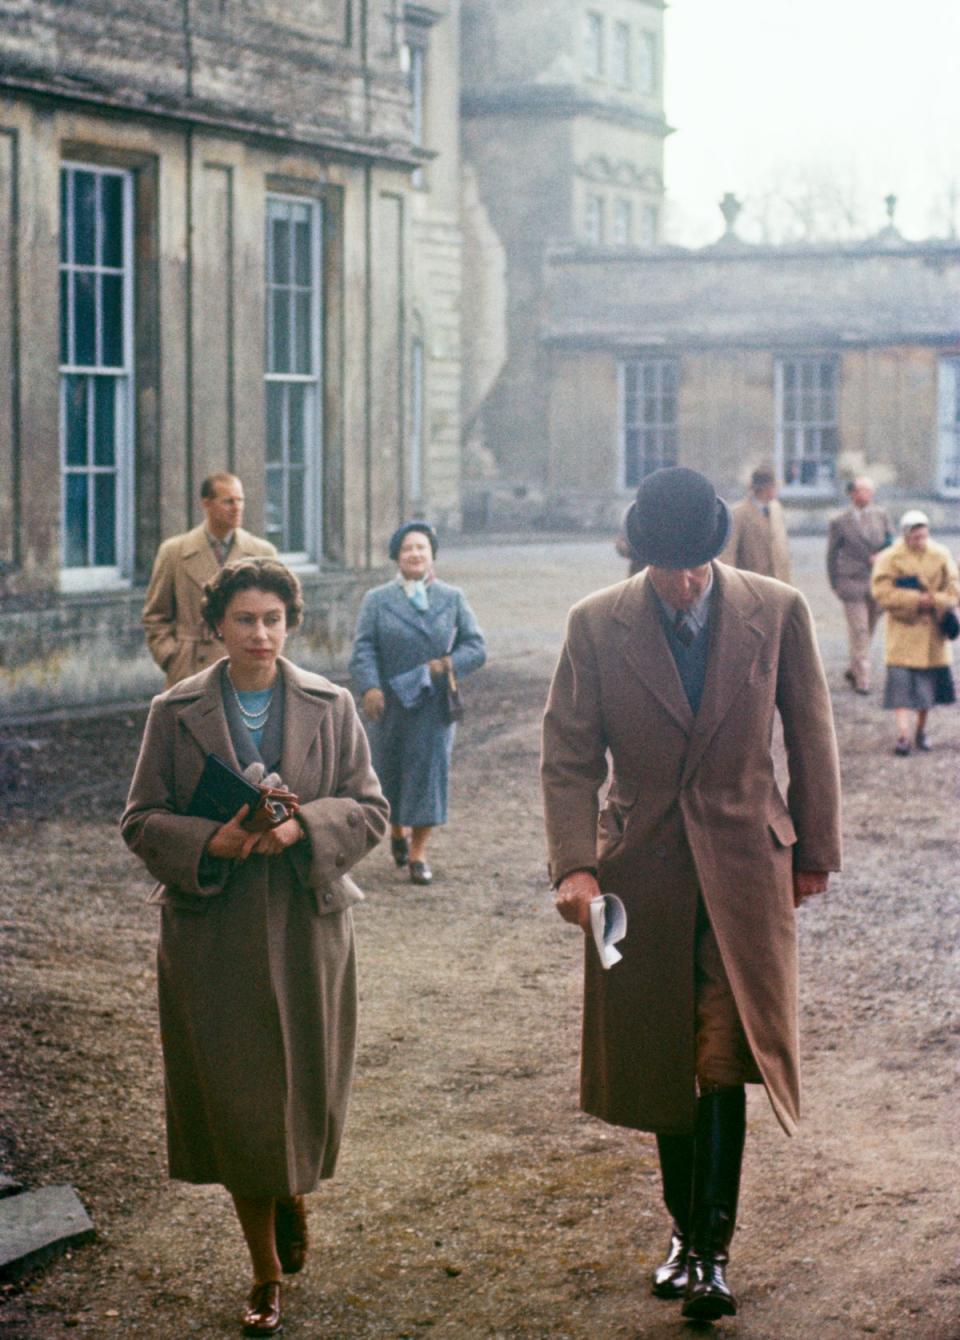 Queen Elizabeth II at Badminton House, Gloucestershire, for the Badminton Horse Trials, April 1956 (Getty Images)